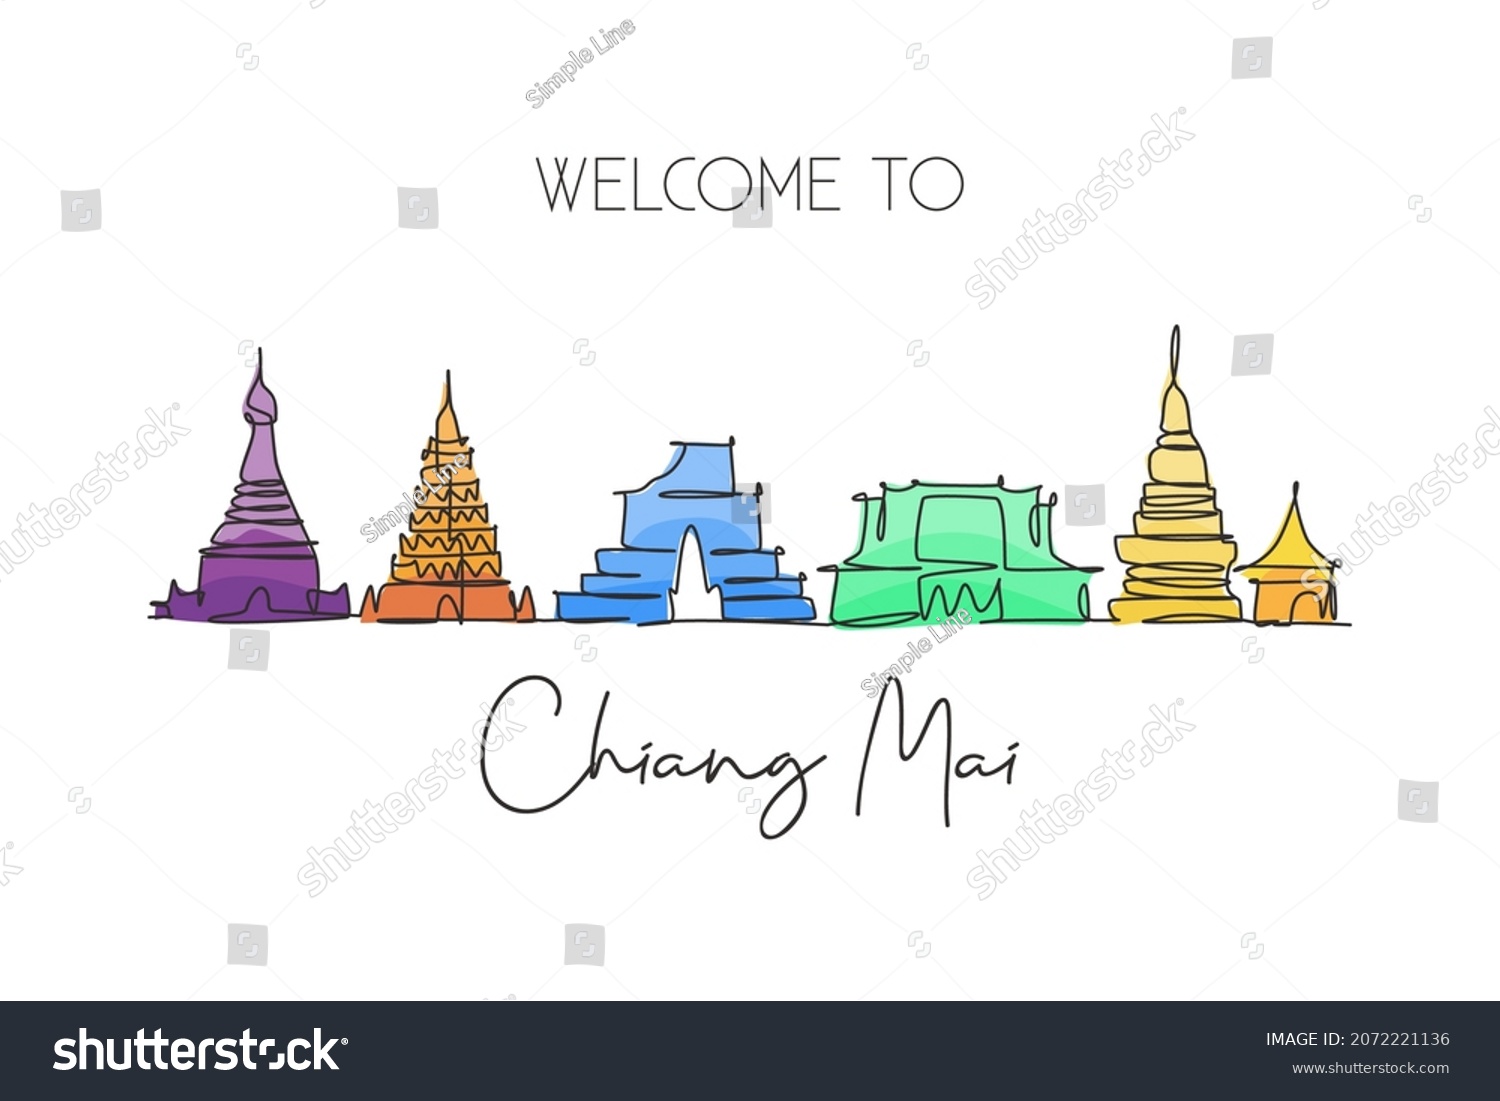 SVG of Single continuous line drawing of Chiang Mai city skyline, Thailand. Famous city landscape. World travel concept home wall decor poster print art. Modern one line draw design vector illustration svg